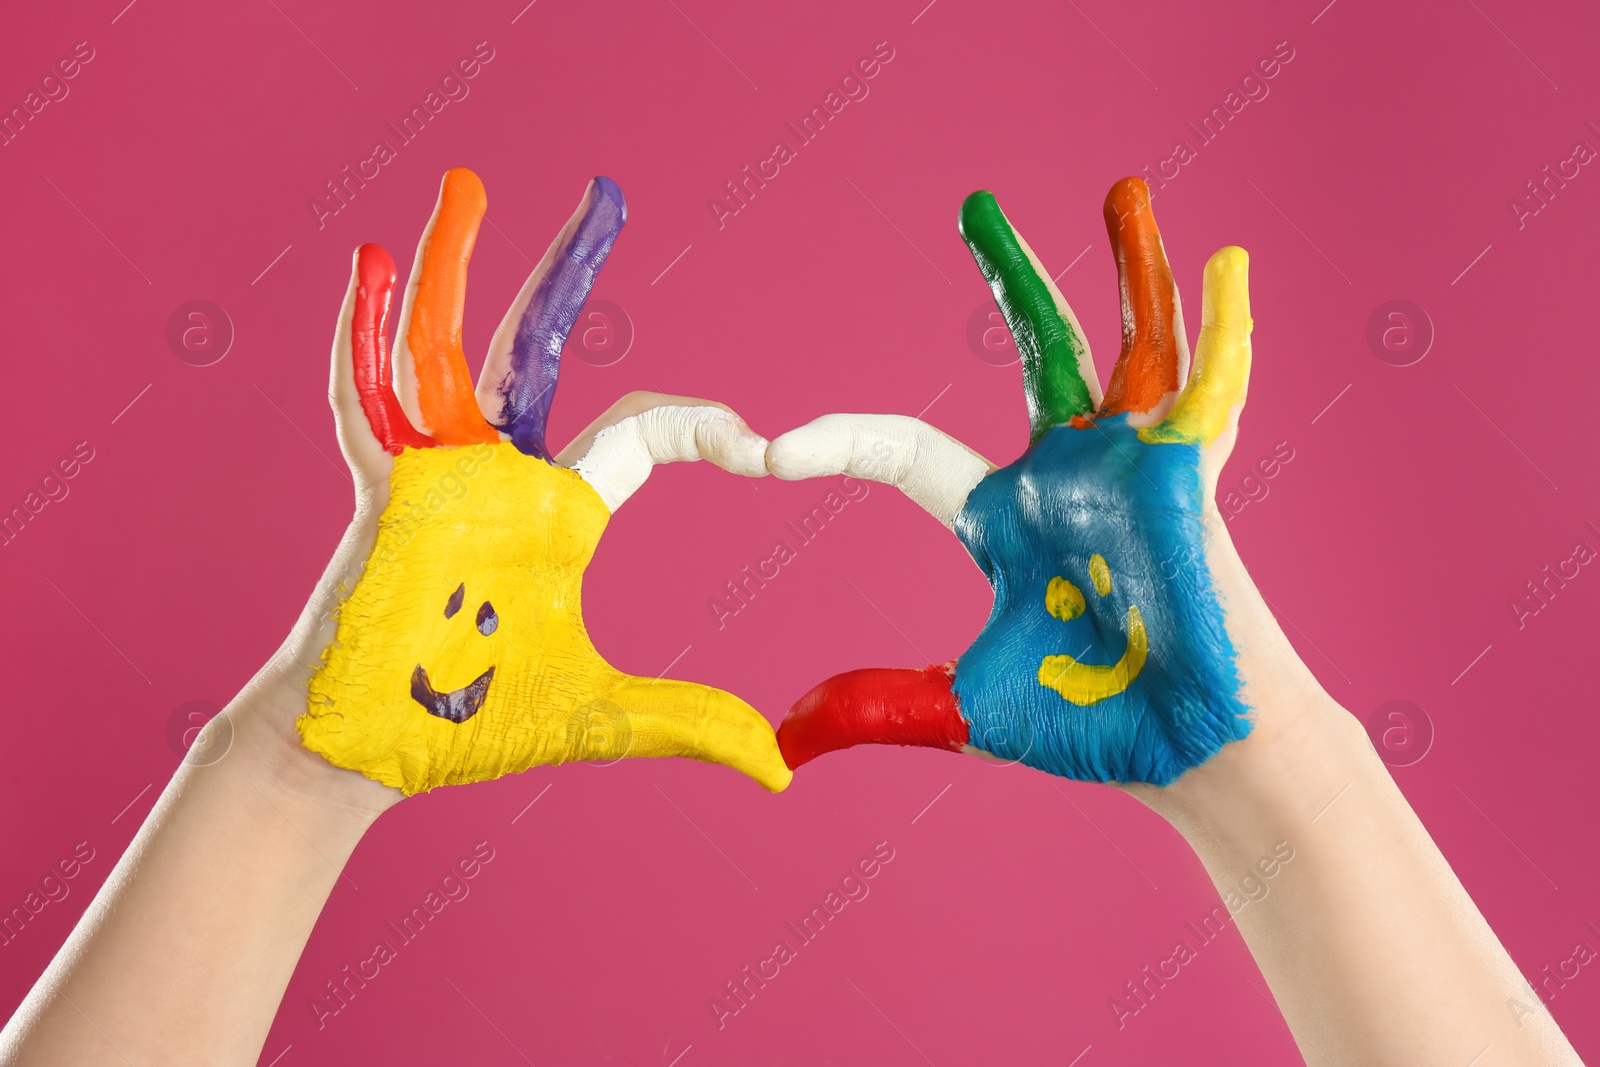 Photo of Kid with smiling faces drawn on palms showing heart gesture against pink background, closeup